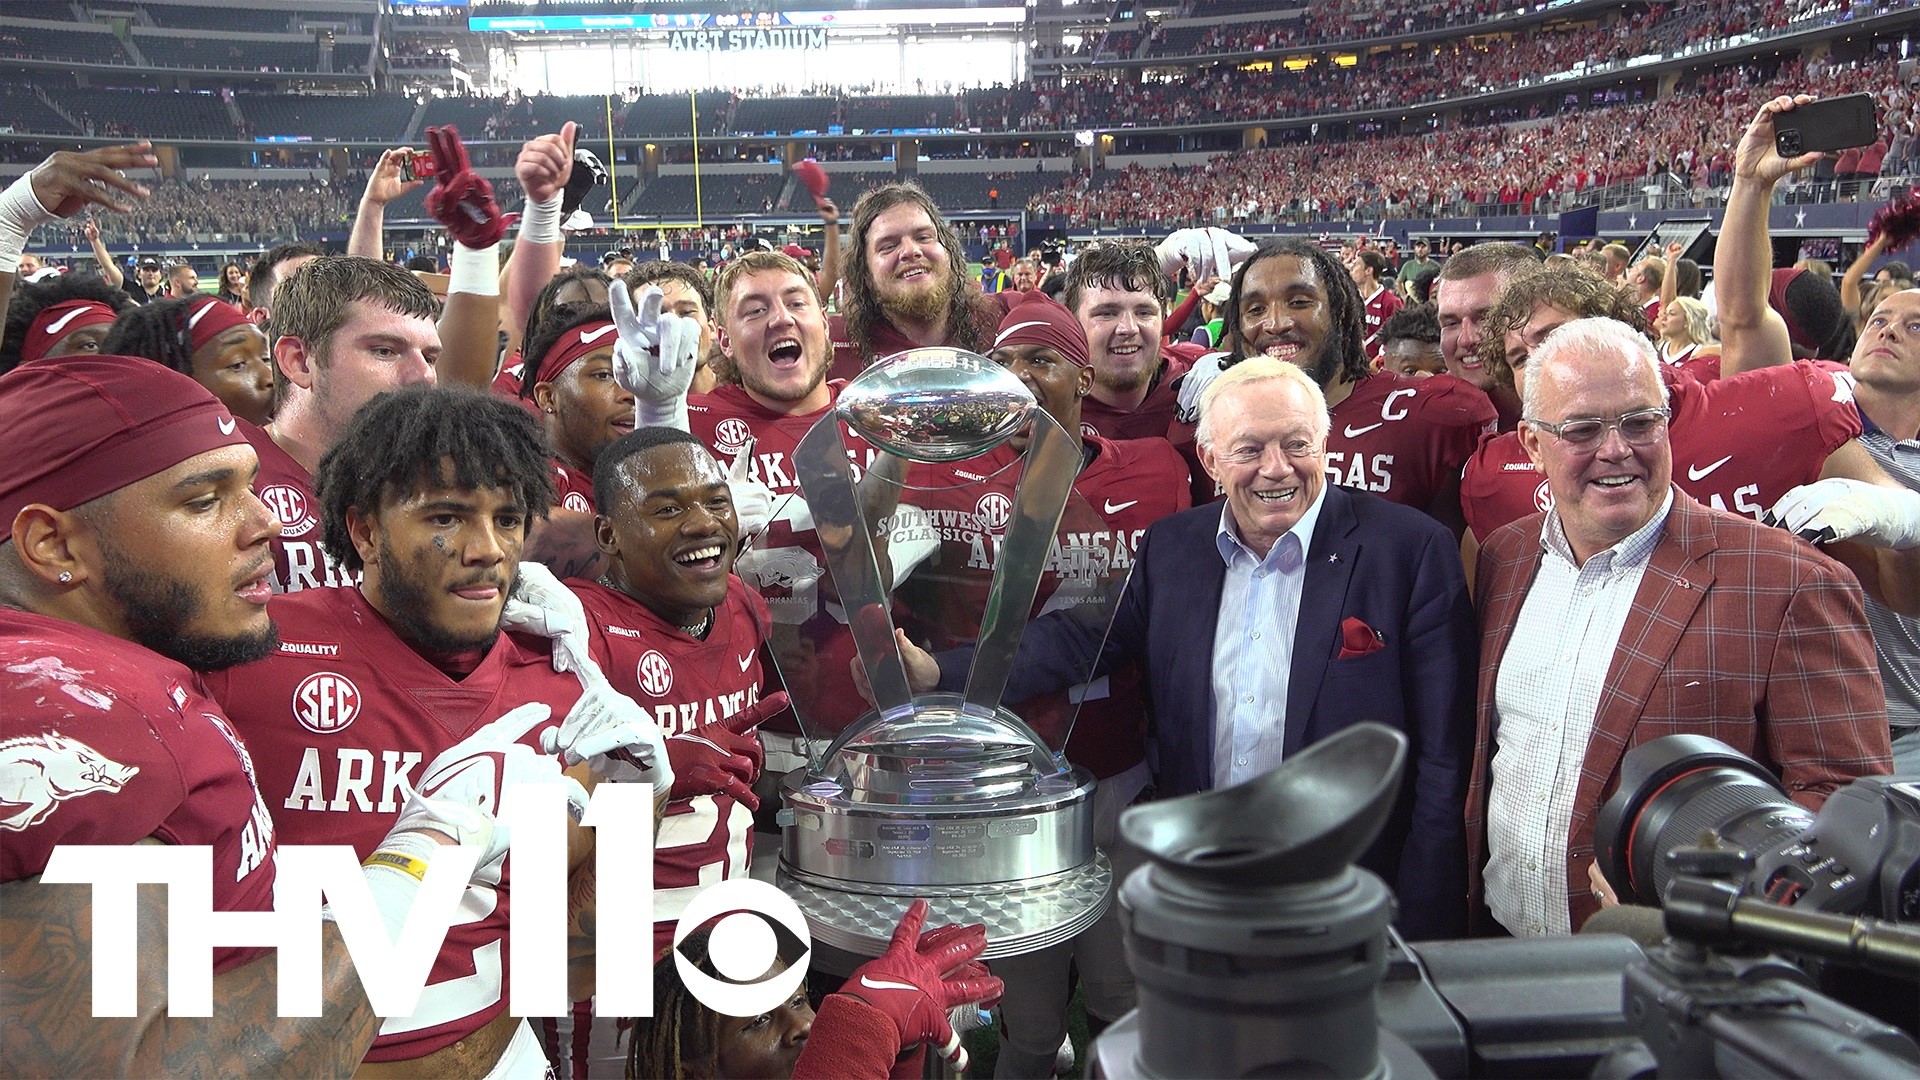 Dallas Cowboys owner Jerry Jones surprised the Arkansas Razorbacks on the field after the big win against Texas A&M.